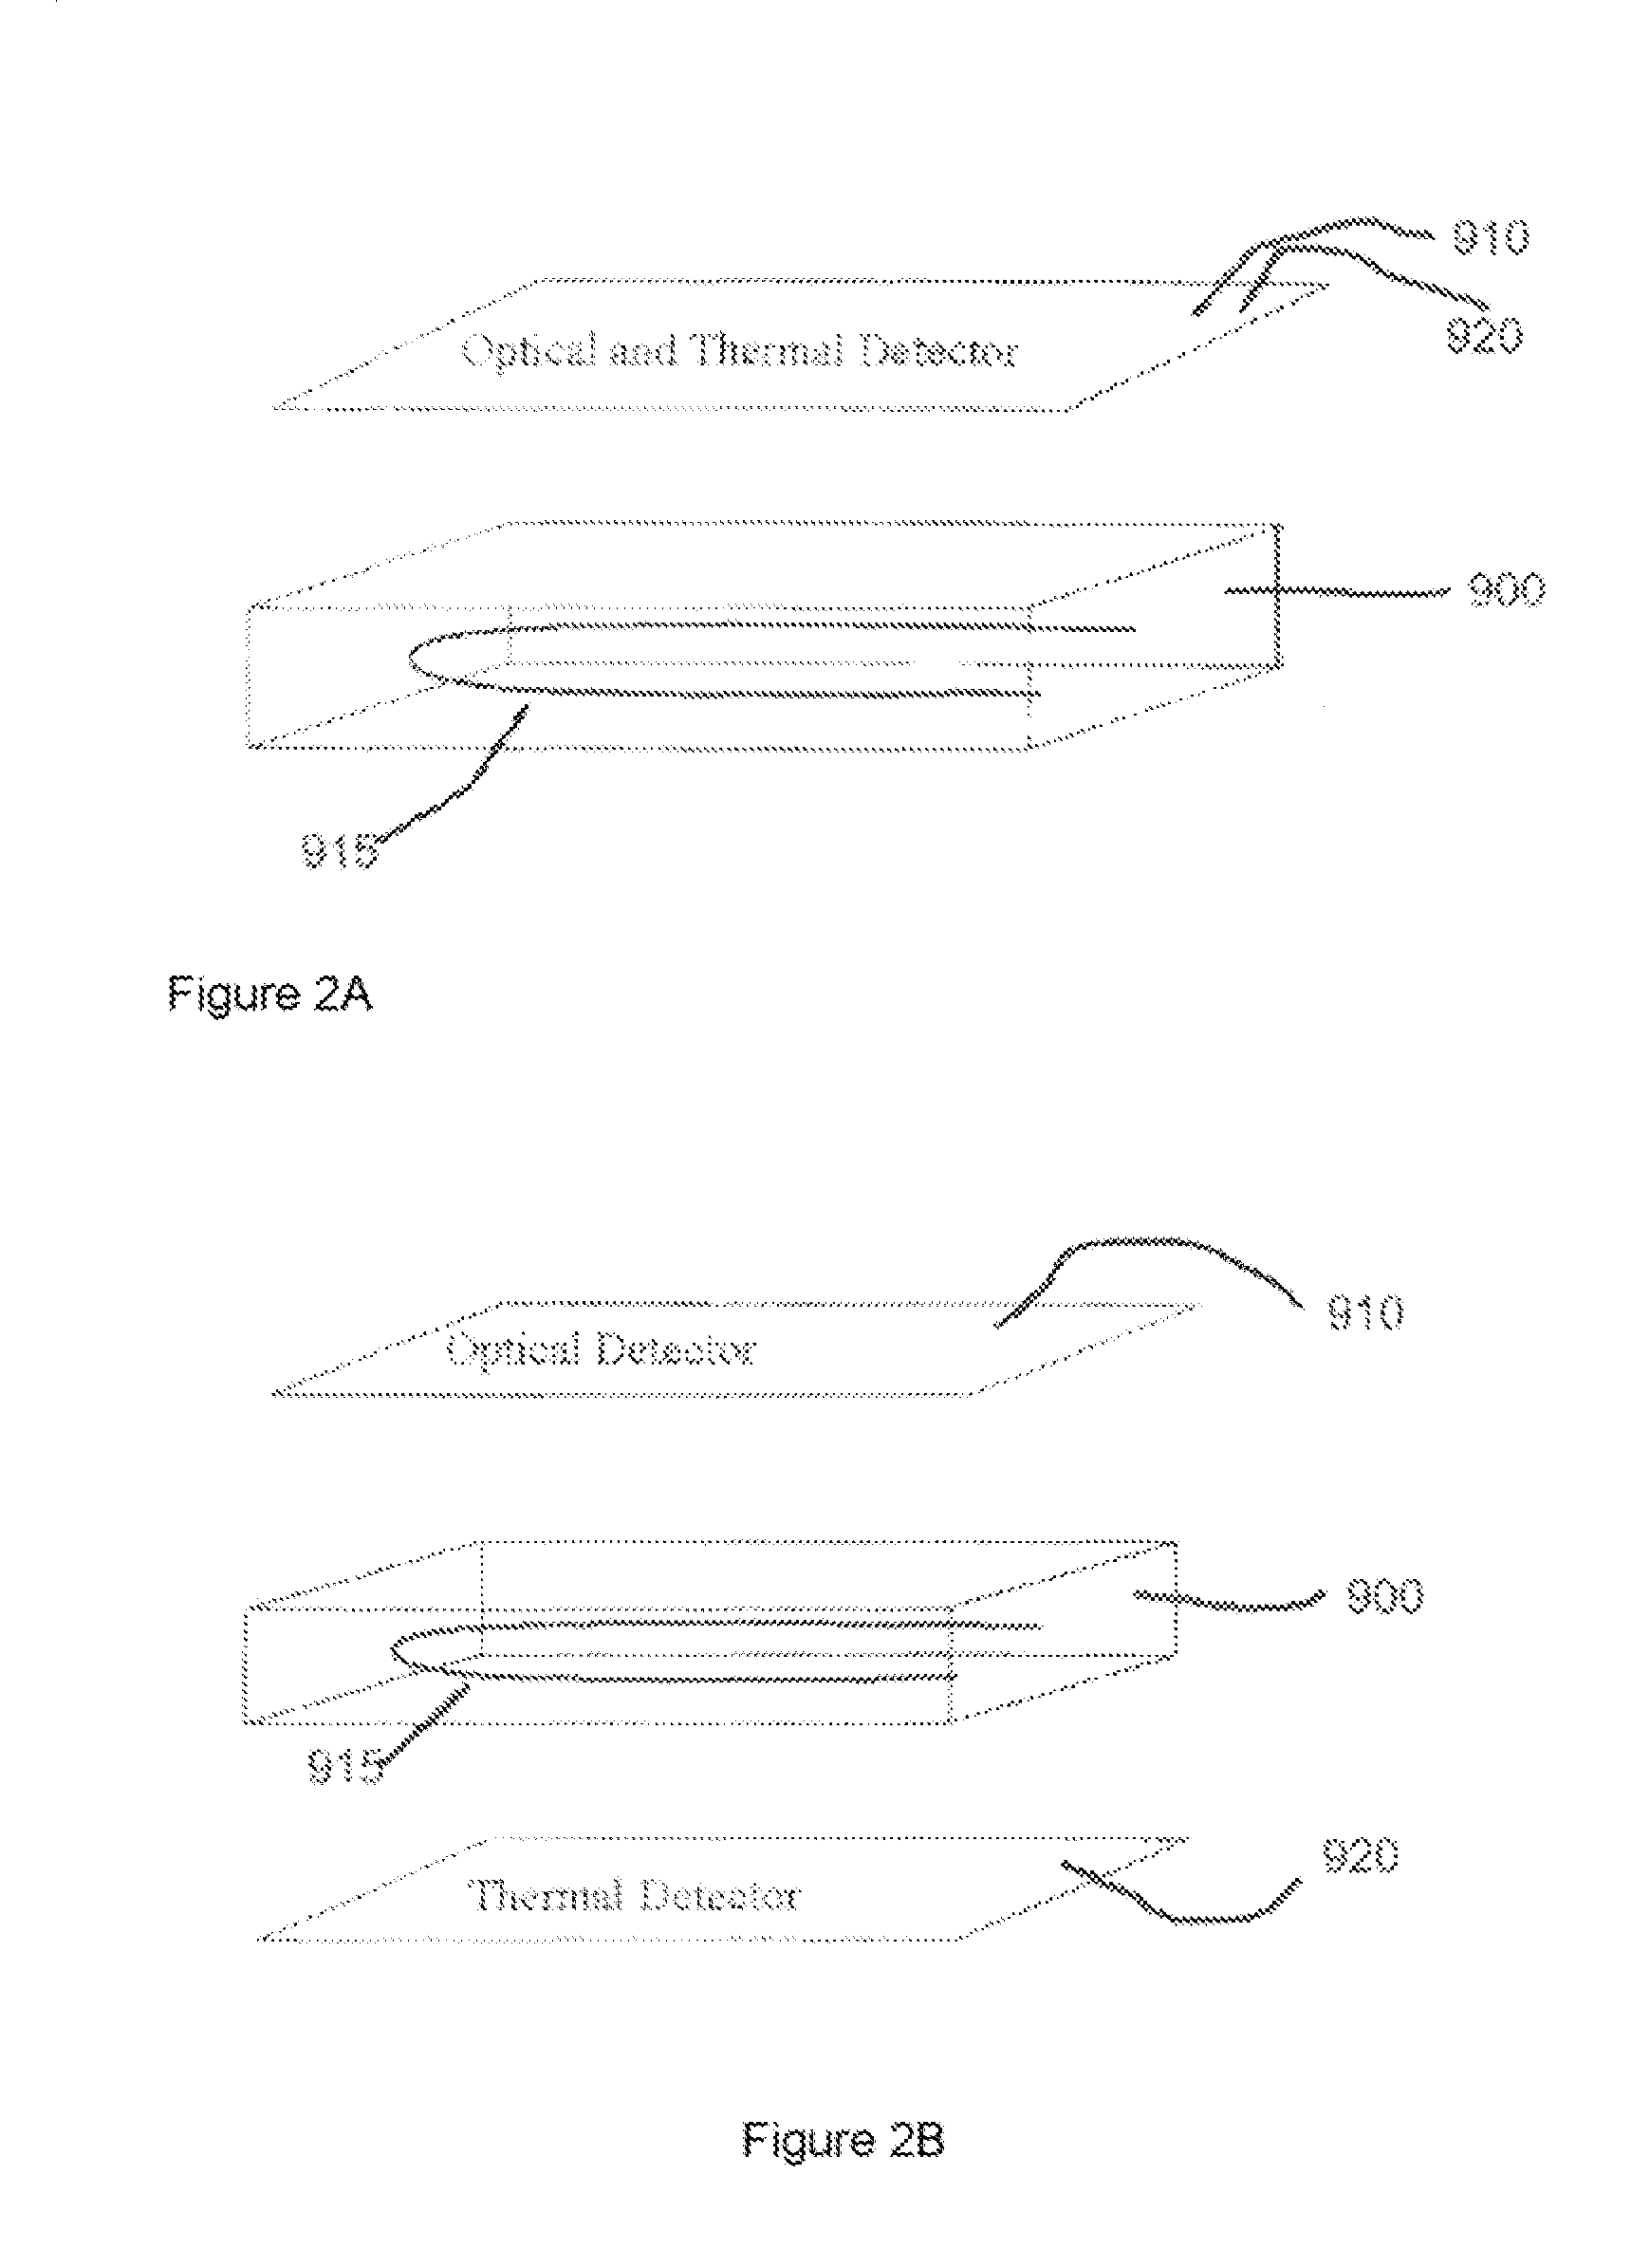 Method and apparatus for applying continuous flow and uniform temperature to generate thermal melting curves in a microfluidic device